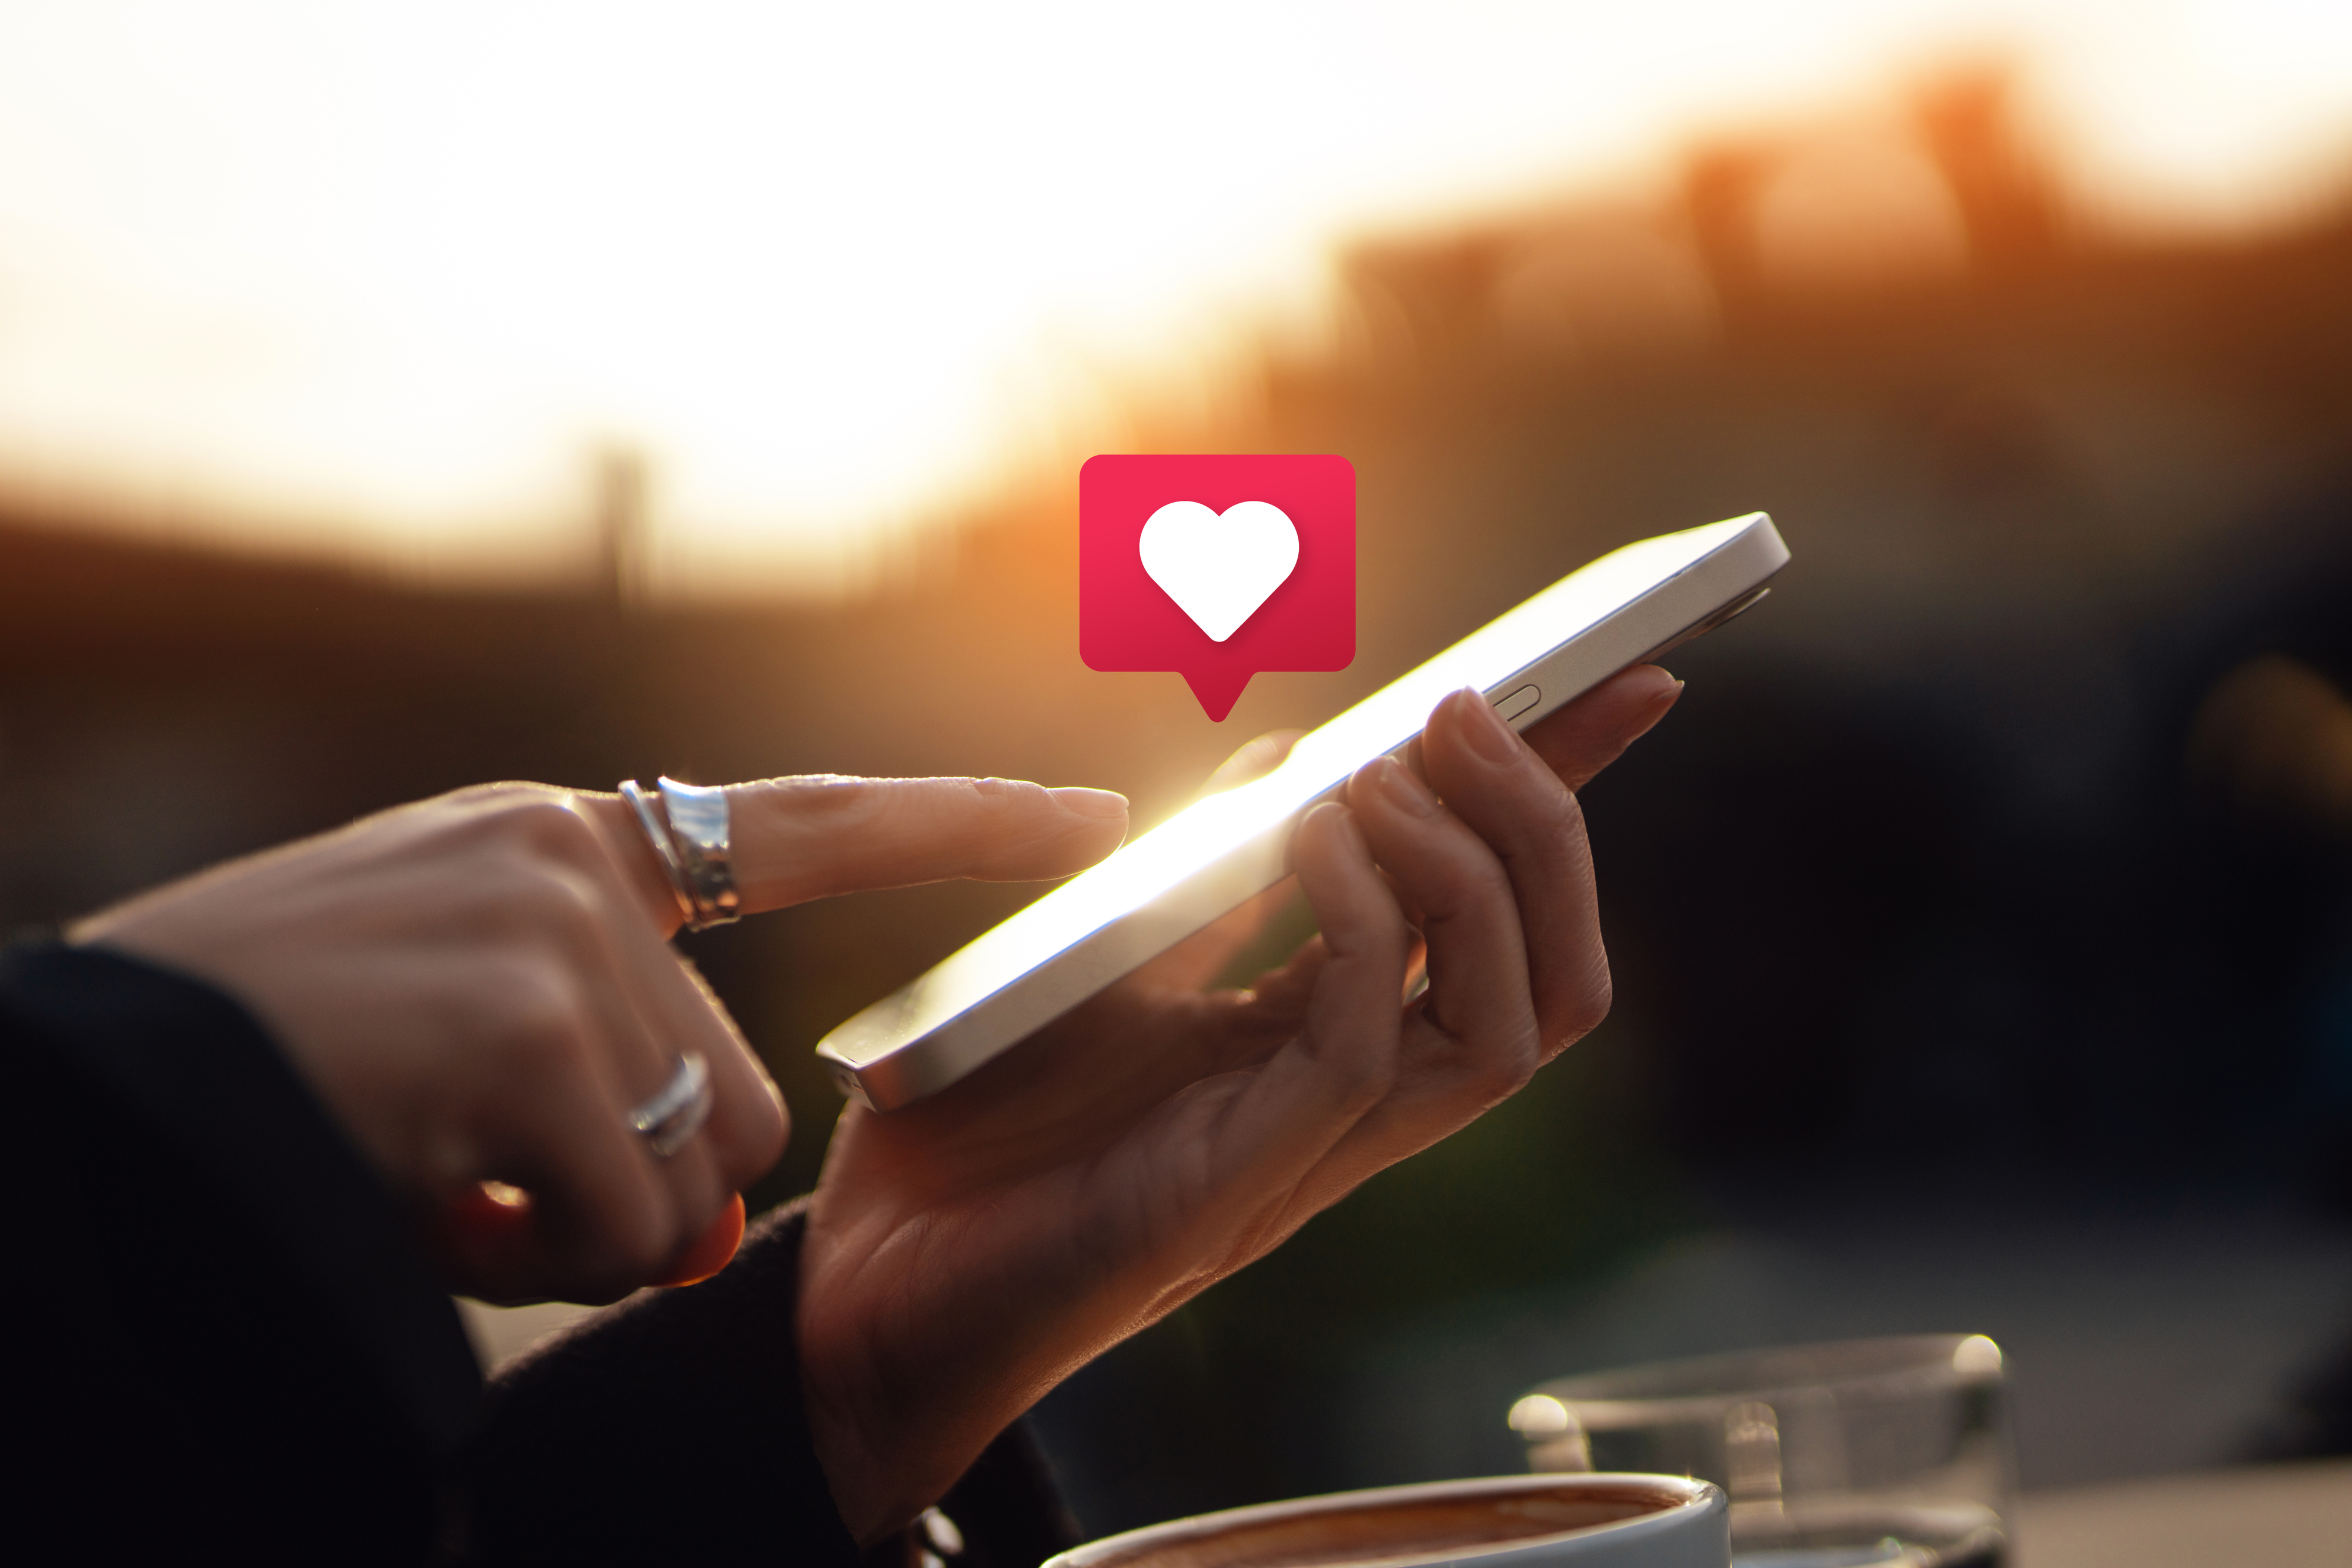 Person using a smartphone with a notification pop-up of a heart symbol, indicating a like or love reaction